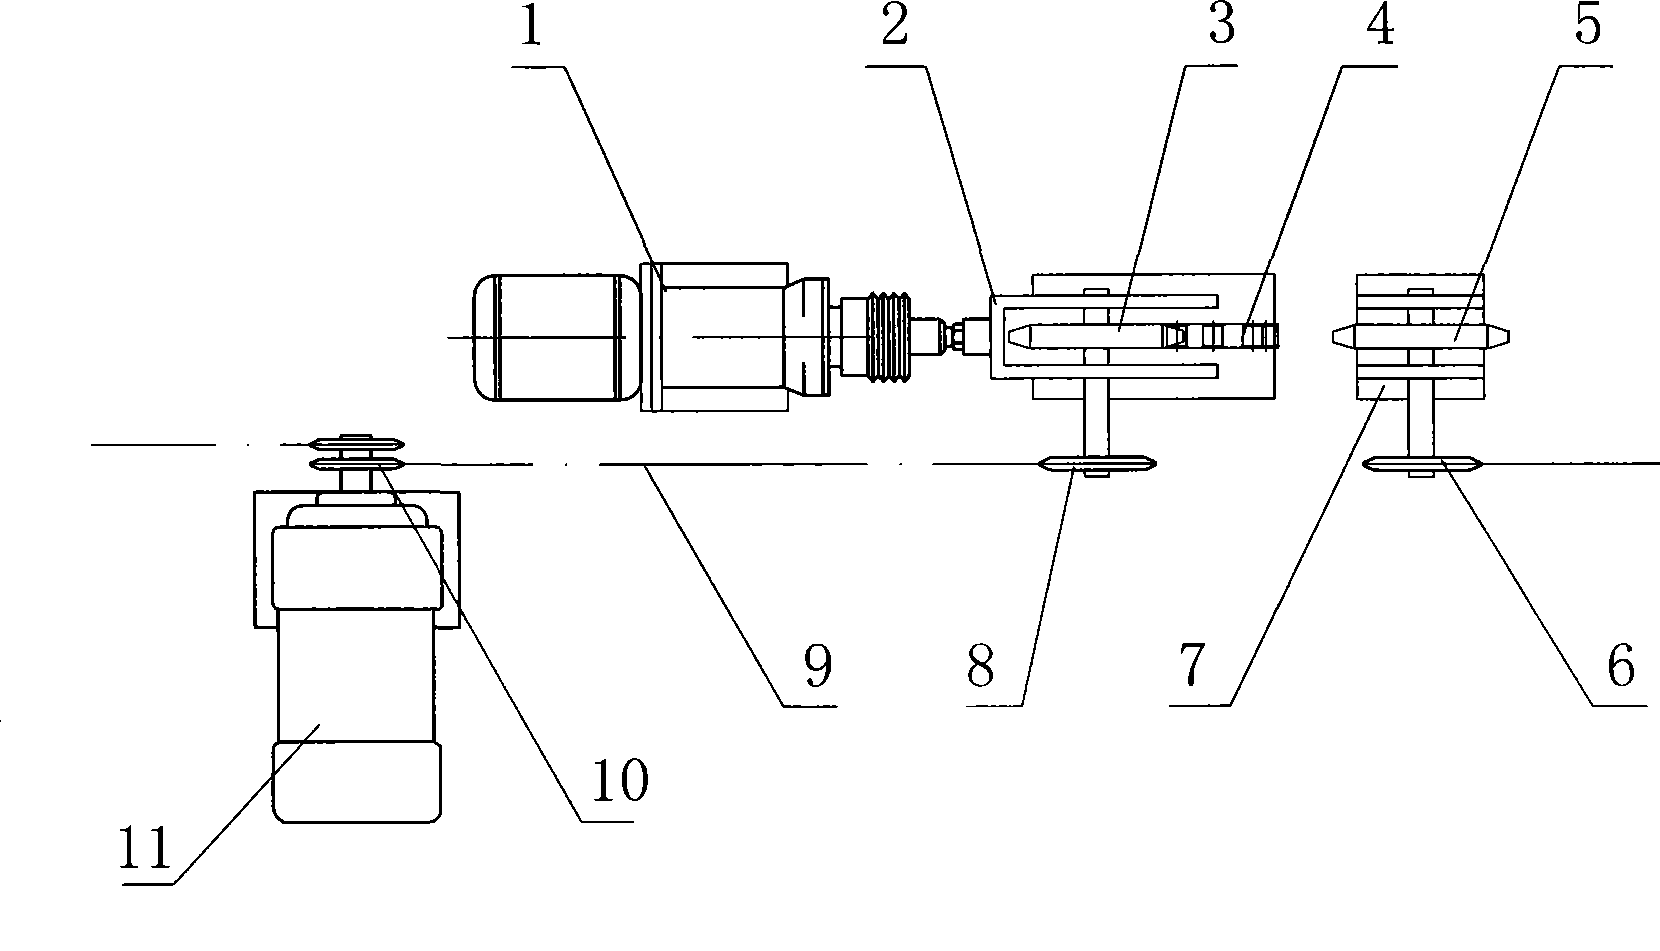 Thrust relay transmission system for parking equipment